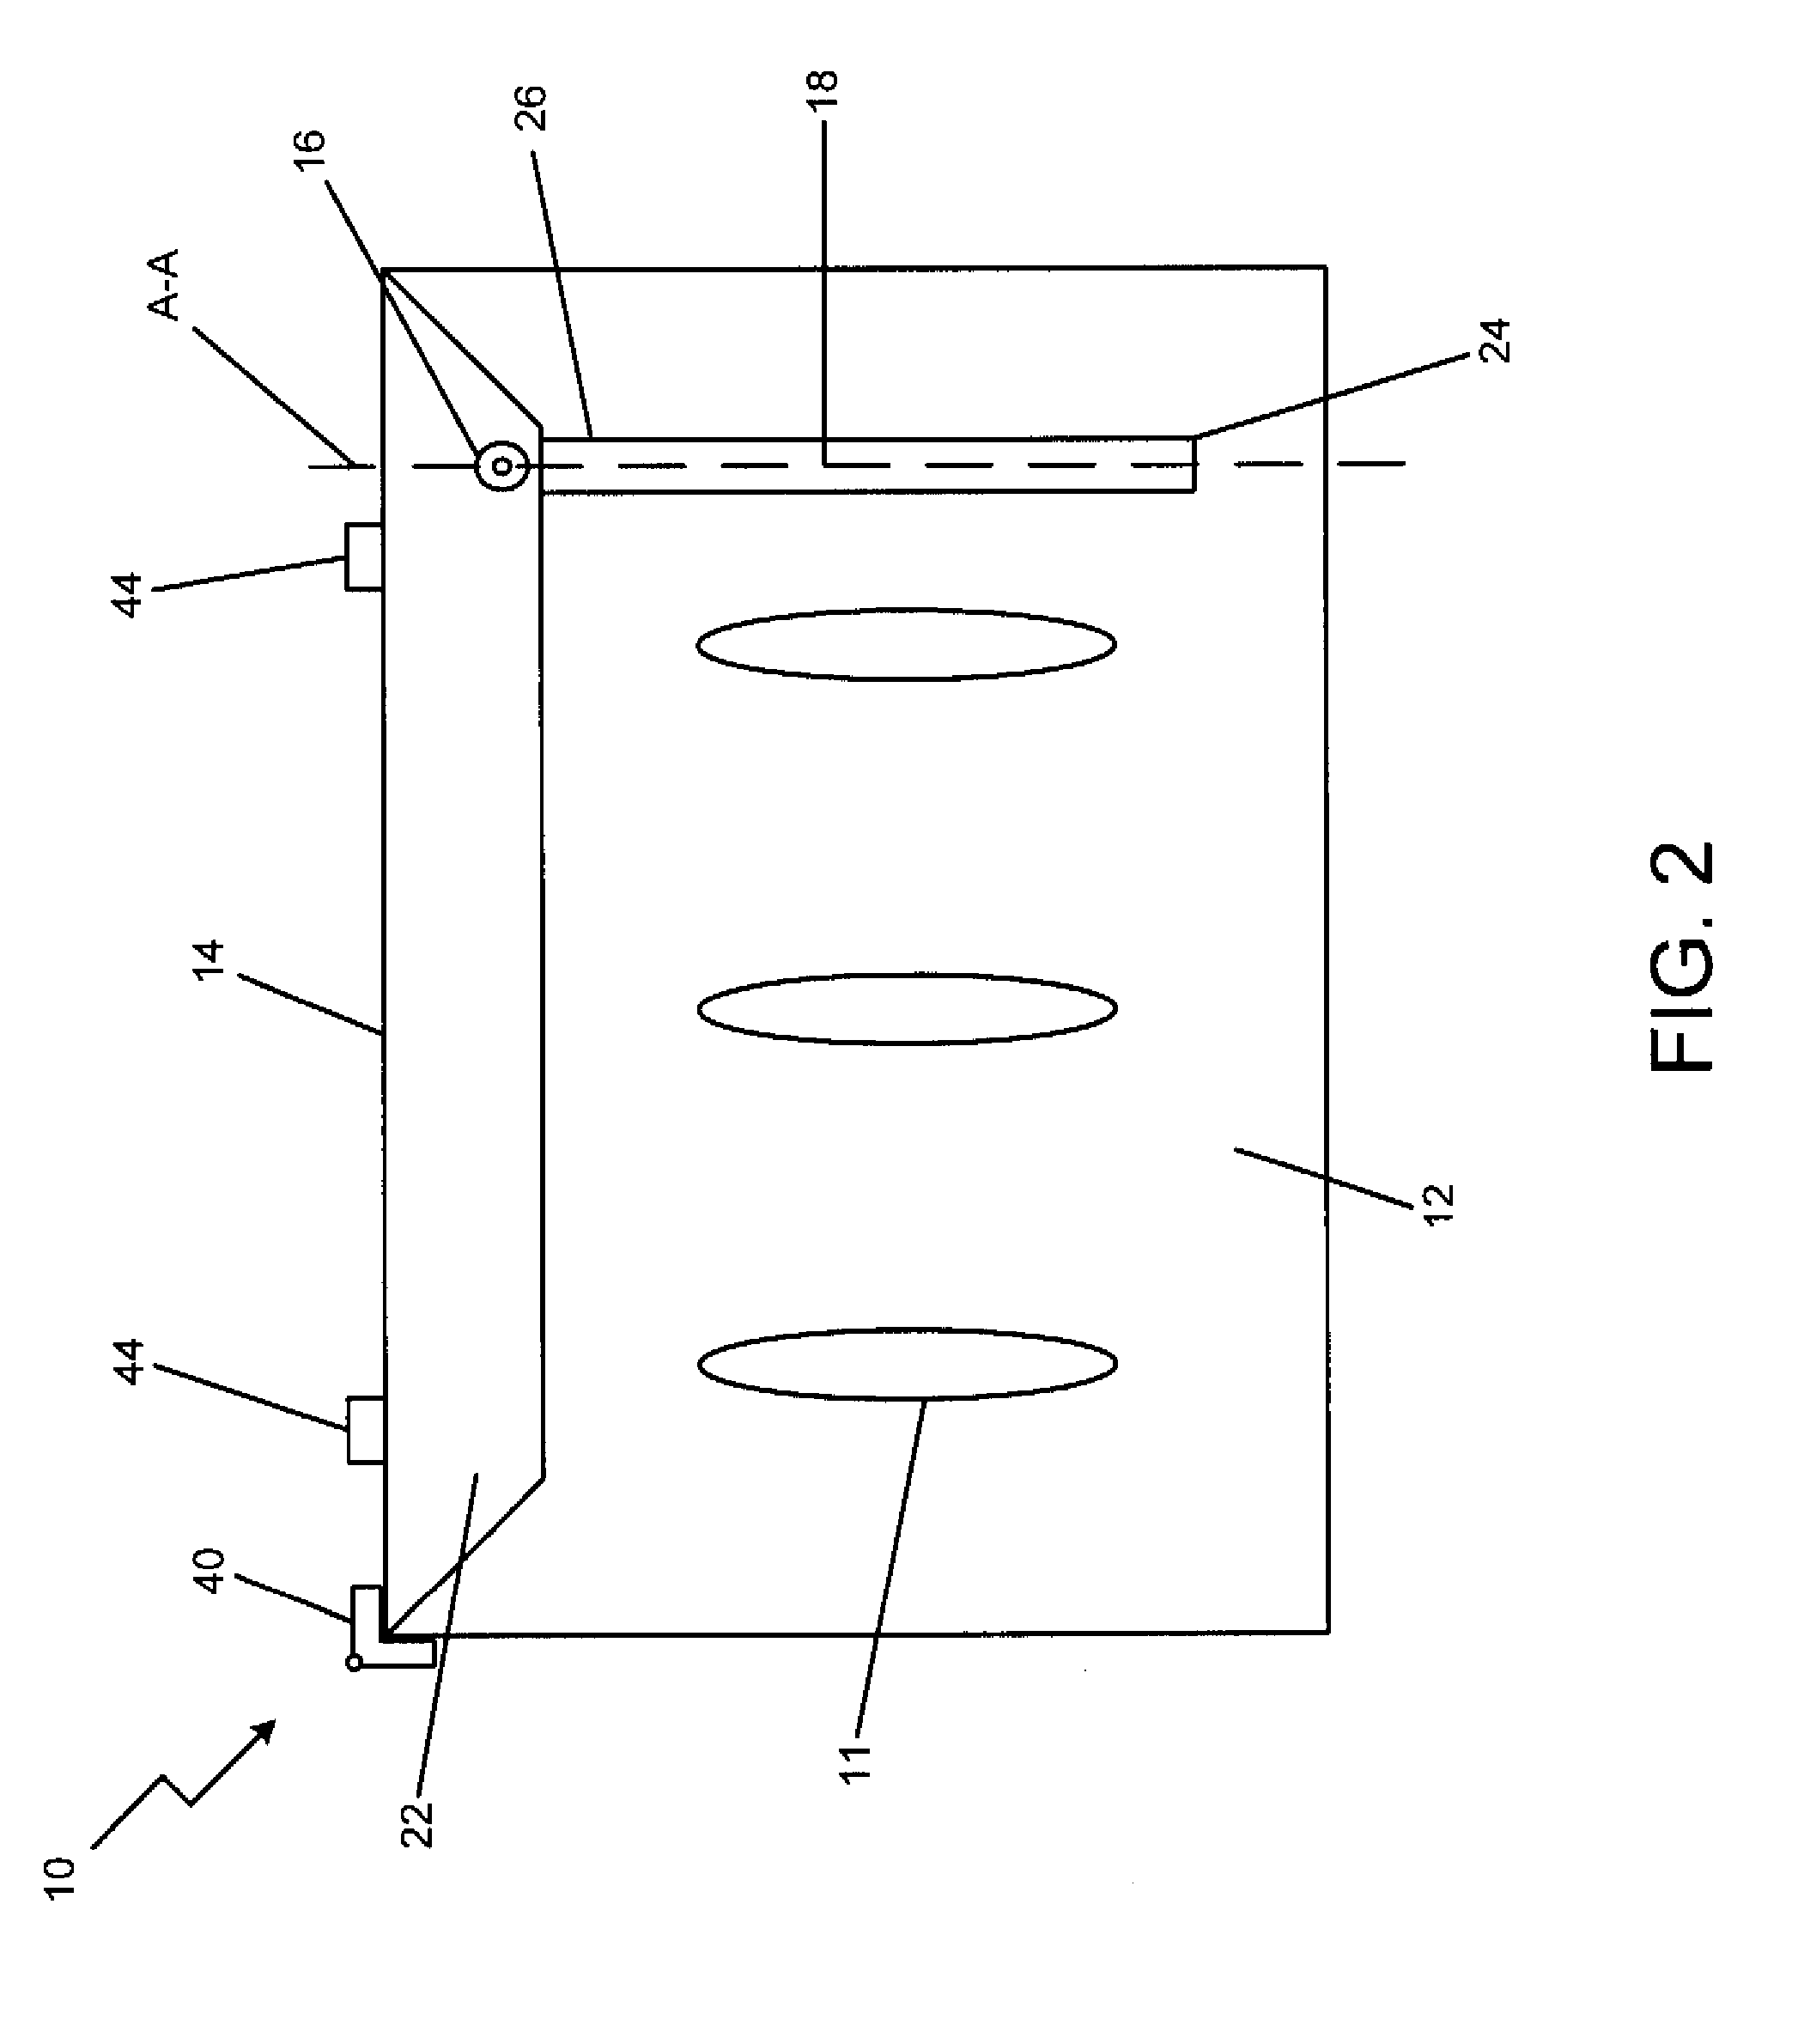 System and method for medical instrument sterilization case having a rotatably displacing cover